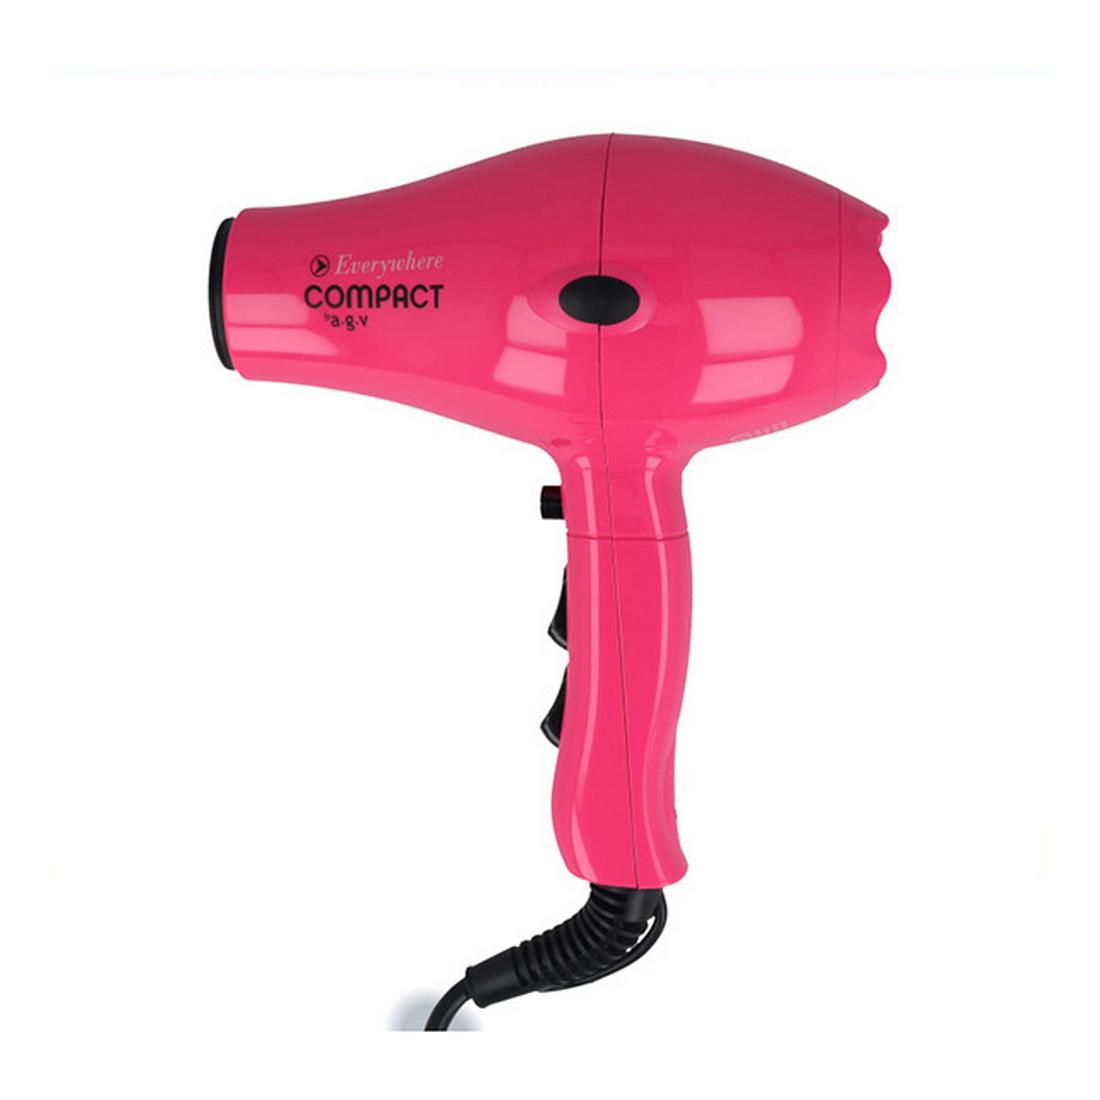 Hairdryer Everywhere  AGV Everywhere Compact Pink Compact